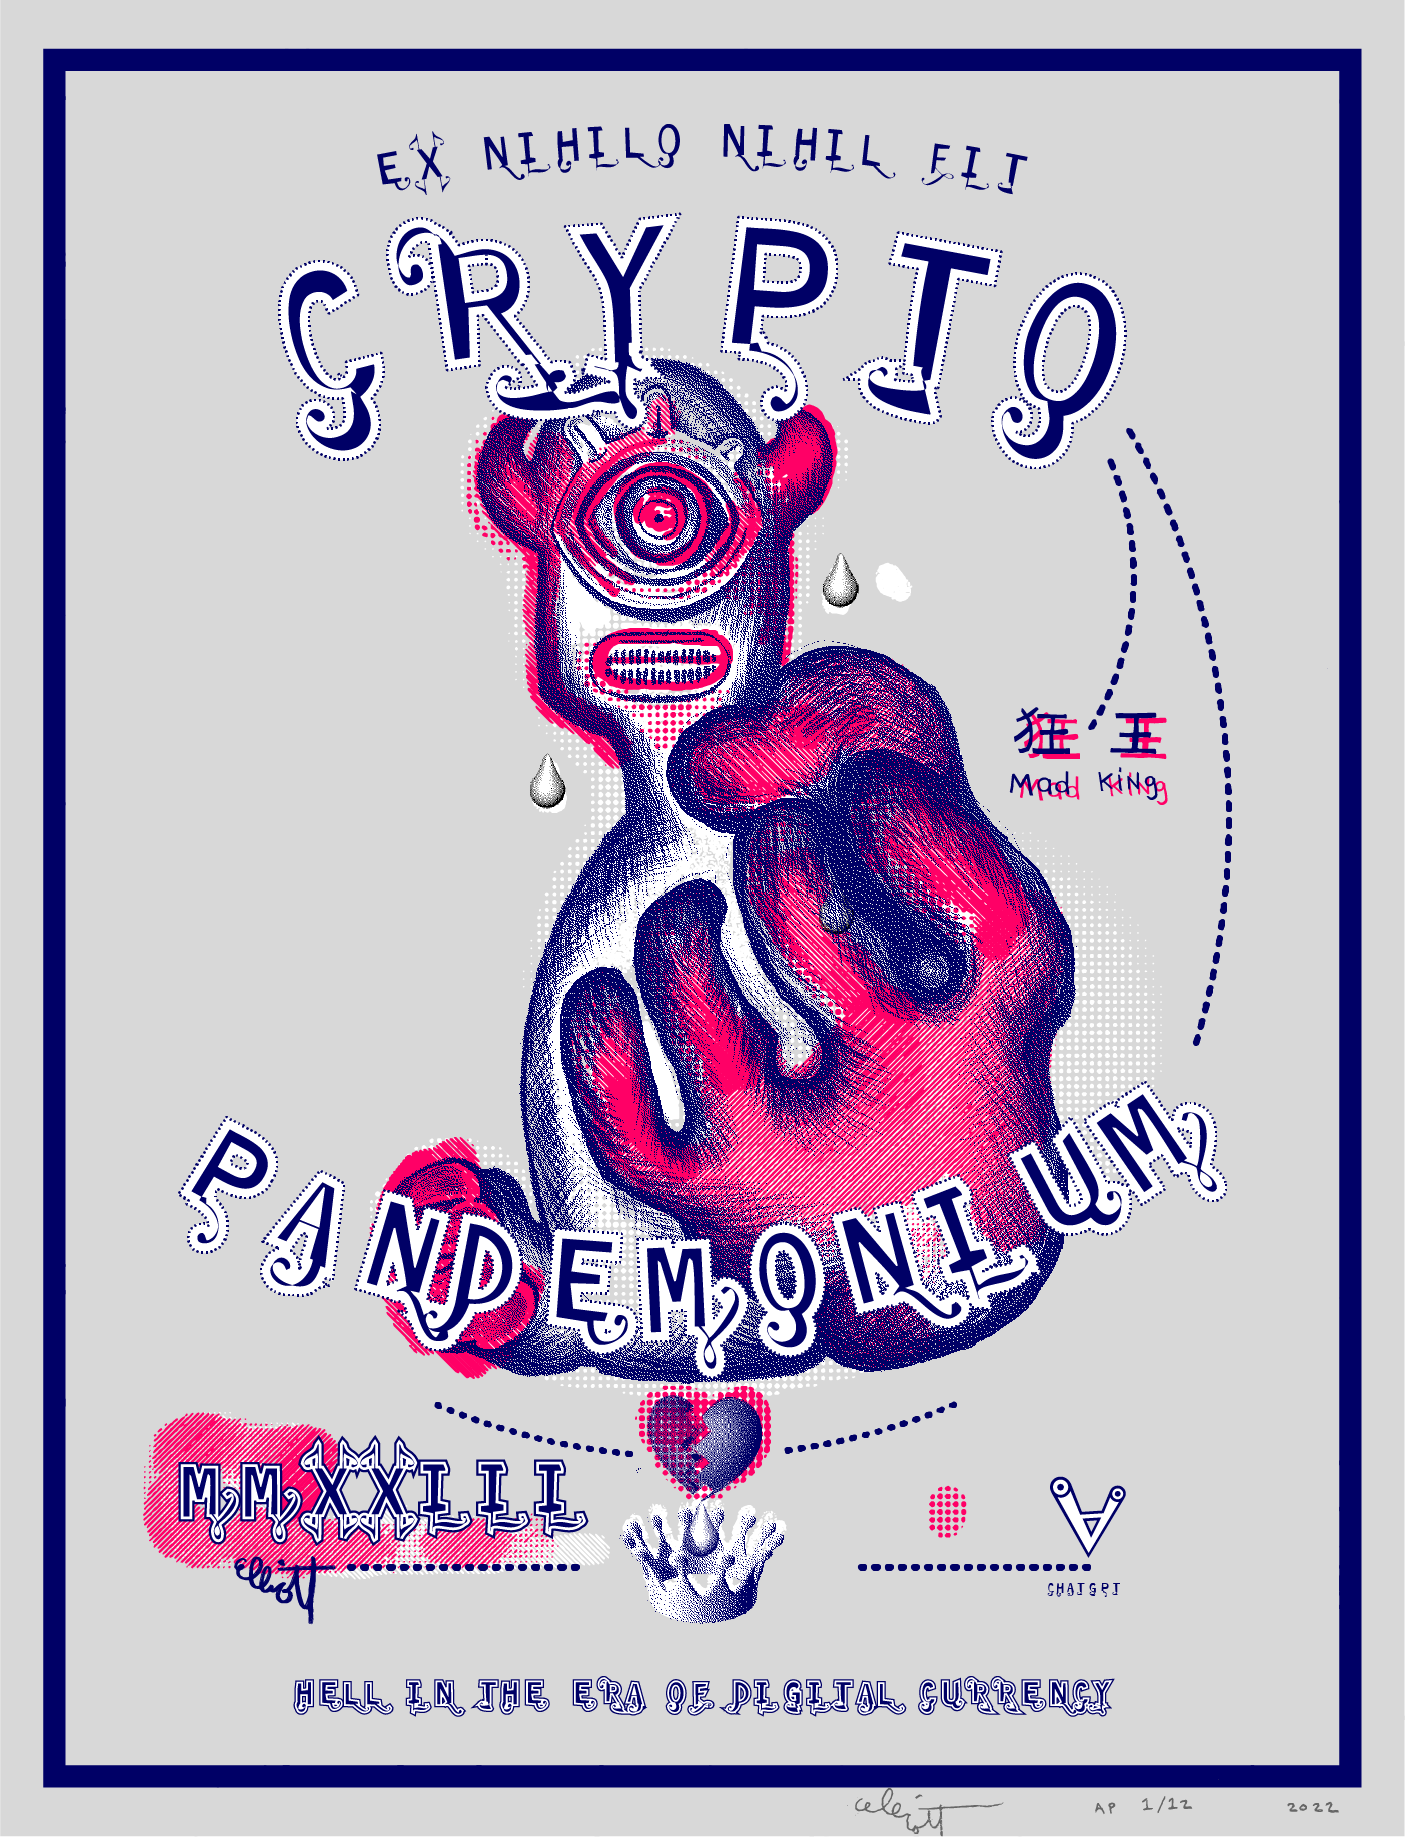 "Crypto Pandemonium - Hell in The Era of Digital Currency" by Elliott Earls 
* 19.5 x 25.5"
* 3 Spot Colors (1 Spot = Fluorescent "day-glow" color)
* Edition of 50
* Canson Mi-teintes Heavy Weight 100% Cotton Paper with a Deckle Edge
* Signed & numbered by the Artist
* Released  Feb 19, 2023 at 12:00 PM
* Hand-Pulled Screenprint
